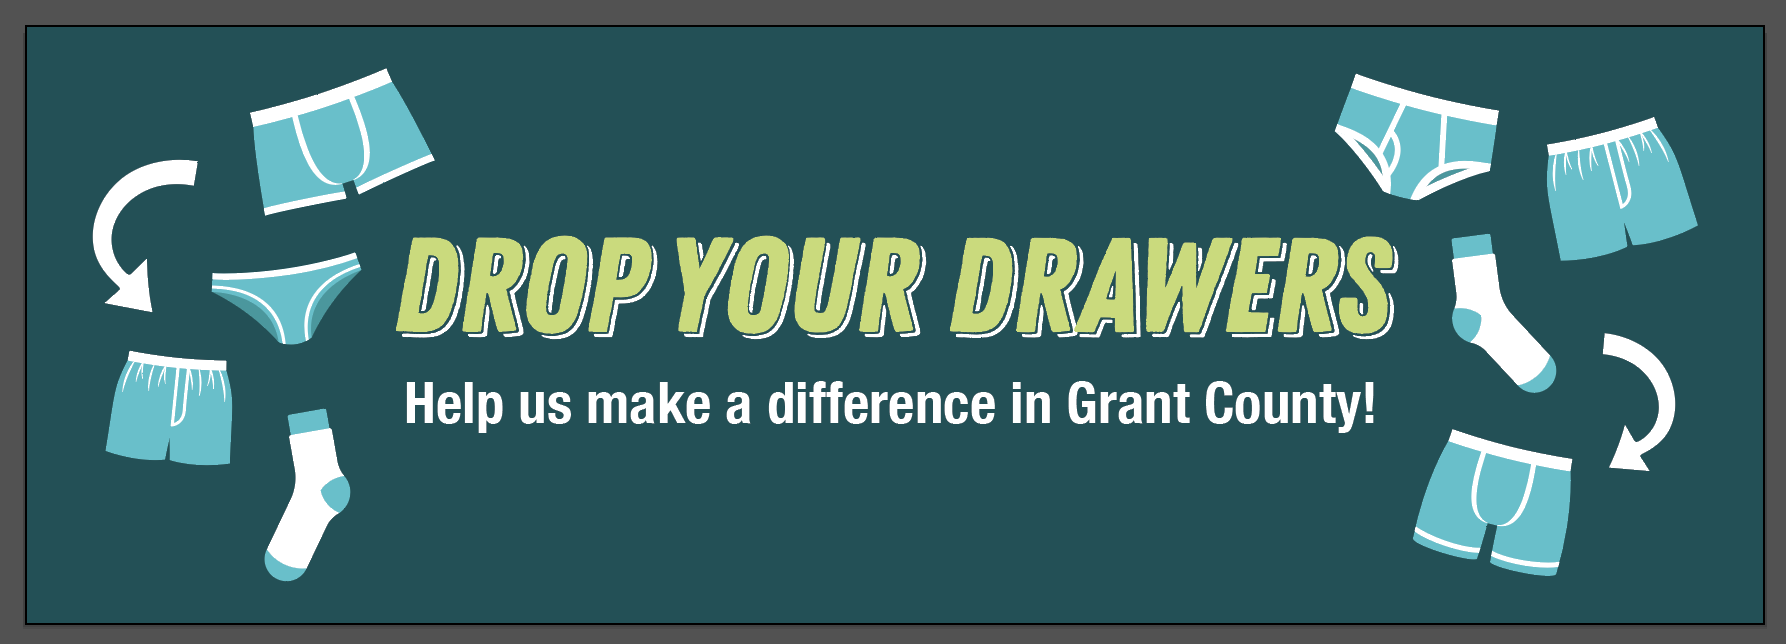 Drop Your Drawers - Help us make a difference in Grant County!